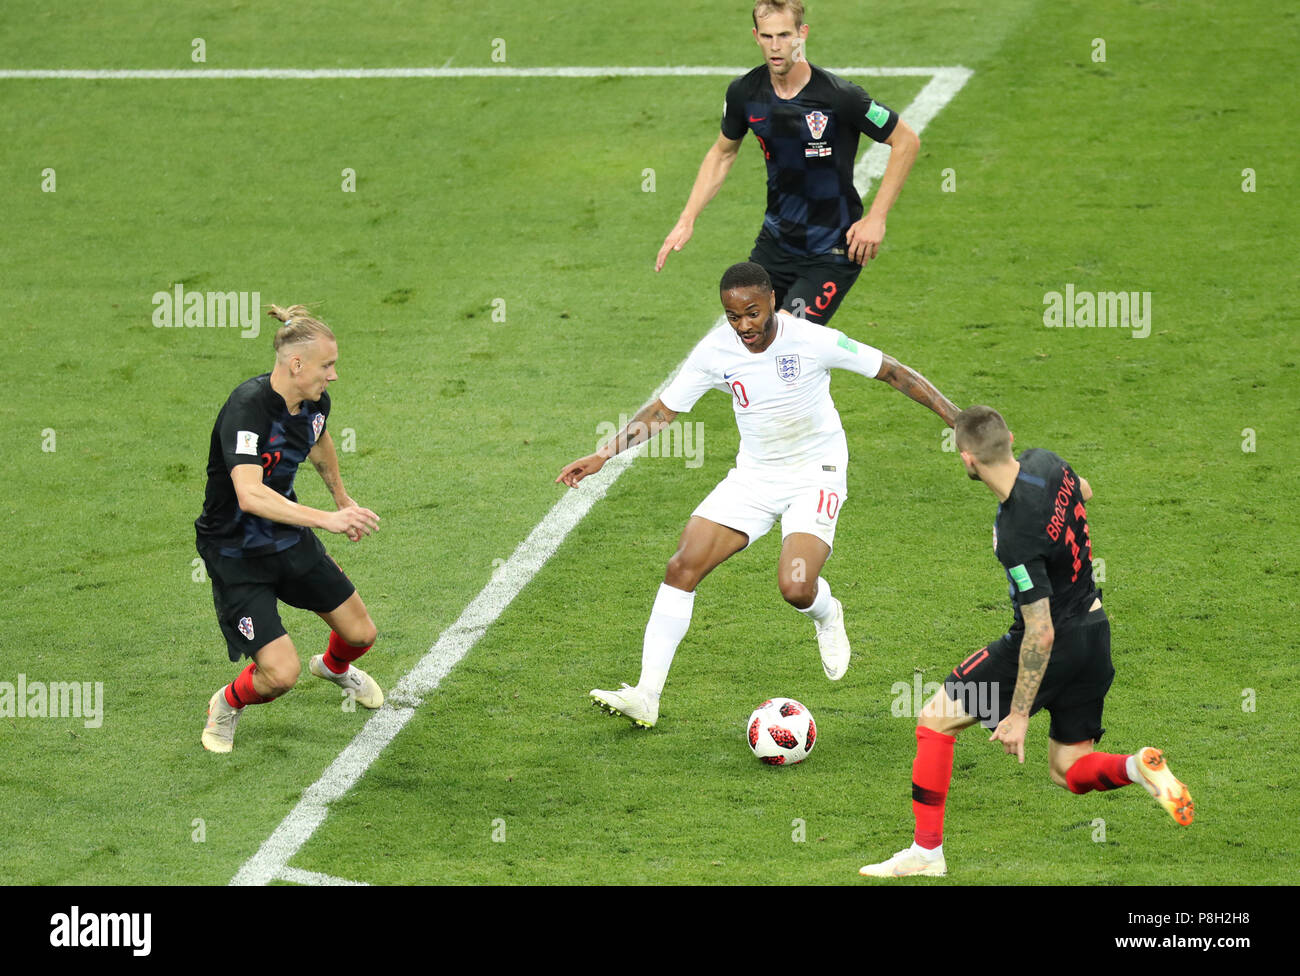 Moscow, Russia. 11th July, 2018. Raheem Sterling (C) of England competes during the 2018 FIFA World Cup semi-final match between England and Croatia in Moscow, Russia, July 11, 2018. Credit: Bai Xueqi/Xinhua/Alamy Live News Stock Photo